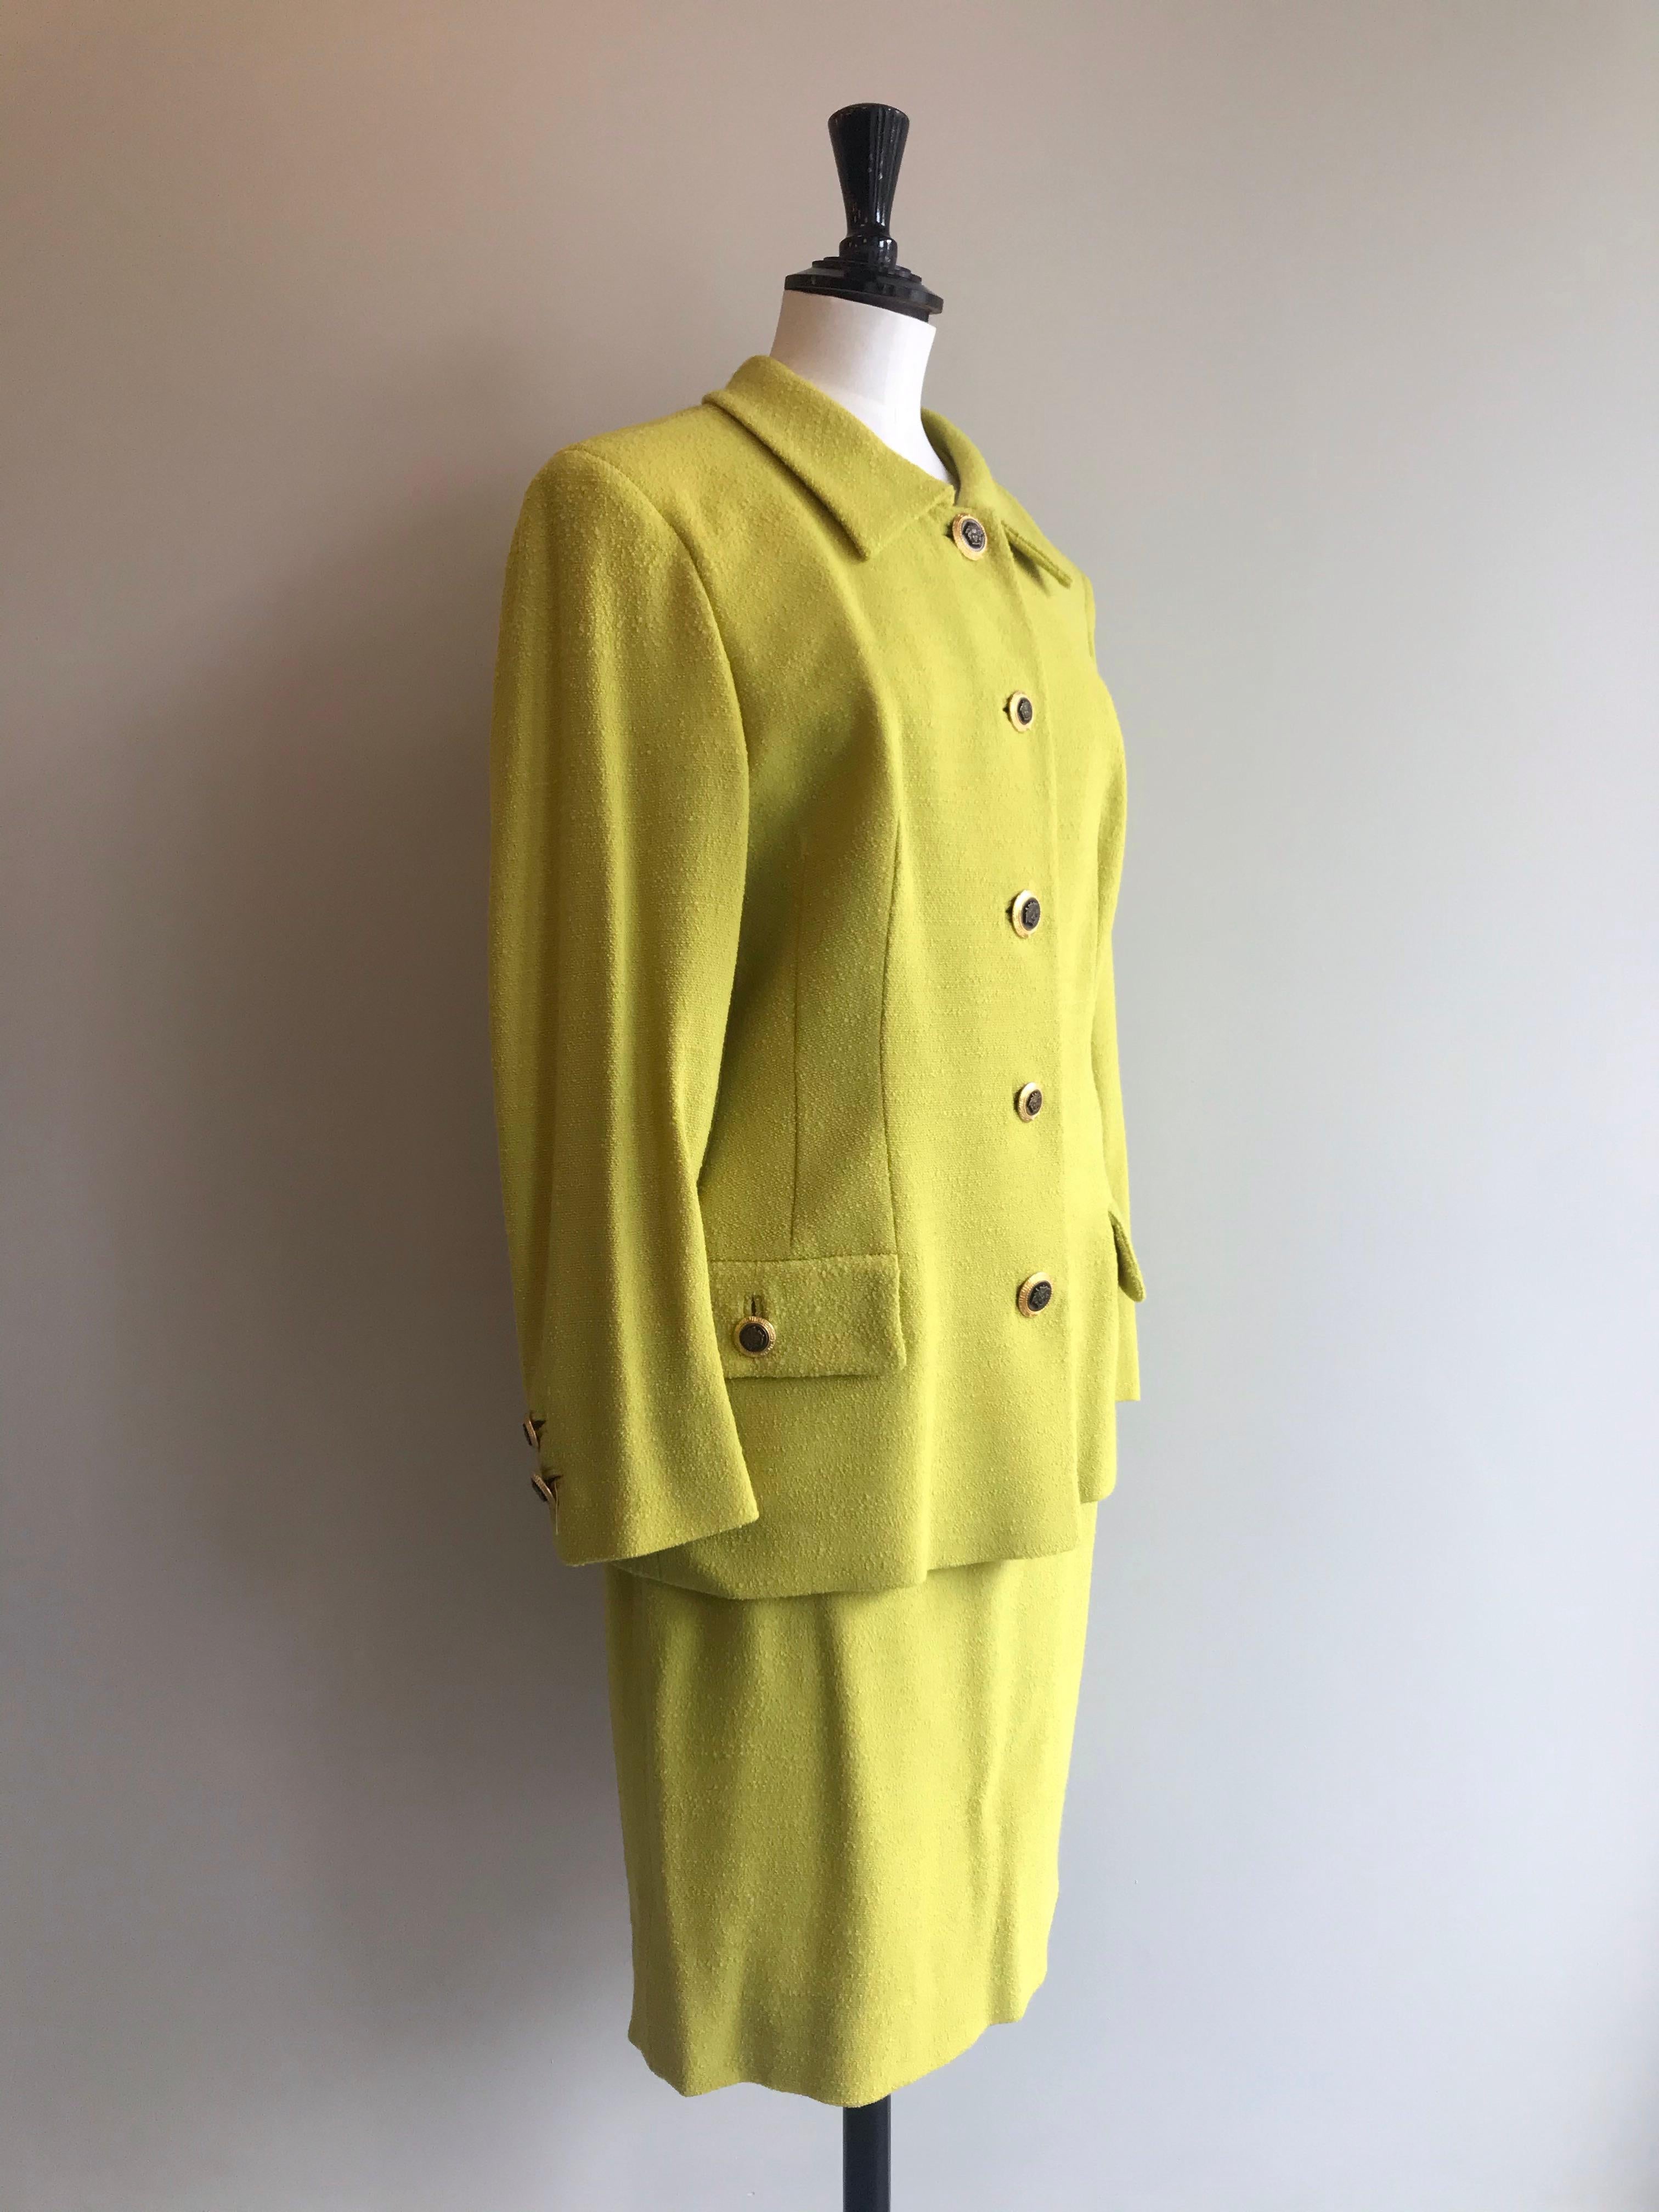 Chartreuse two piece wool skirt suit from Gianni Versace Versatile. Boxy blazer and straight cut knee length skirt. Statement Medusa adorned gold buttons in signature Versace style. Two closed off pockets at either side of the hip. Buttons on cuffs